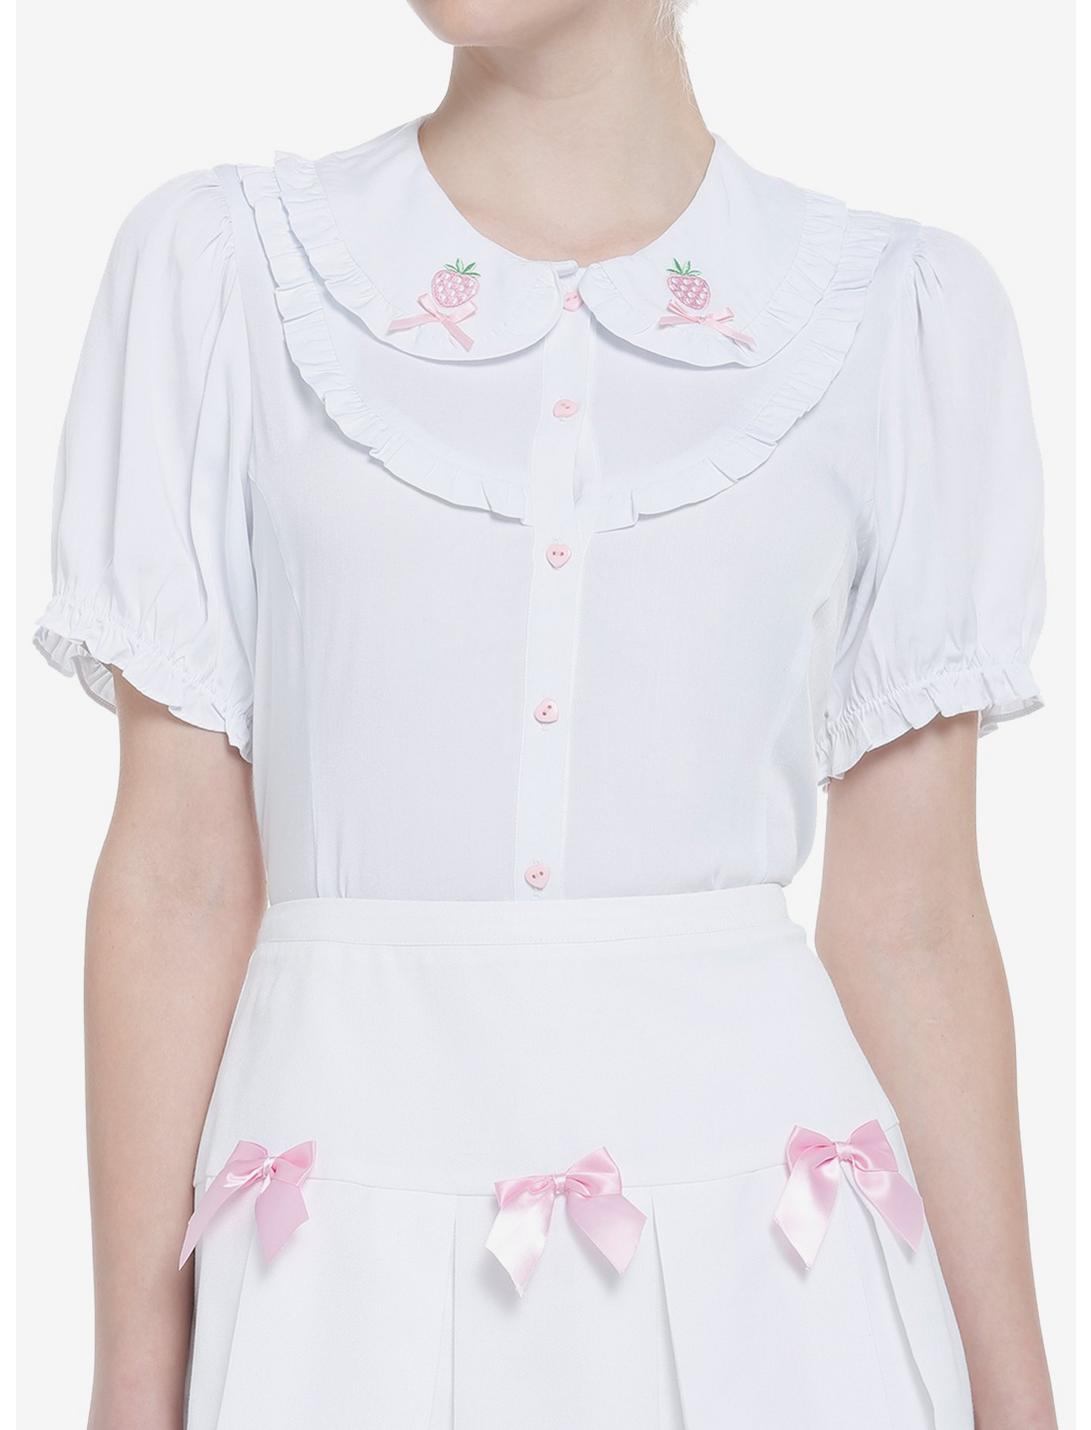 Strawberries & Hearts Ruffled Girls Woven Button-Up, WHITE, hi-res